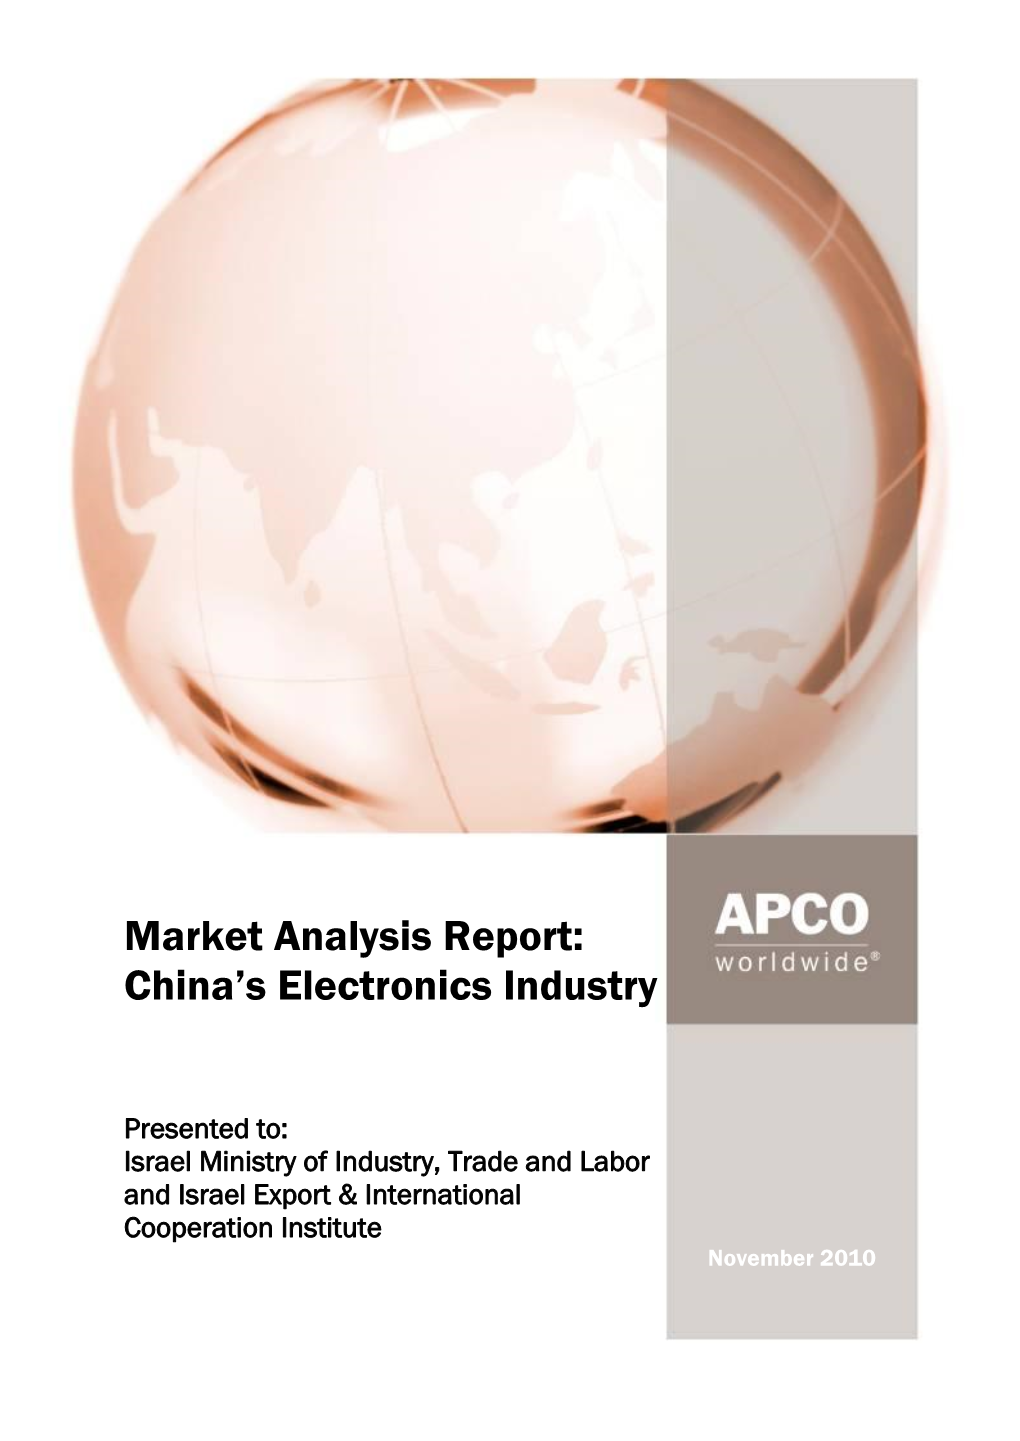 Market Analysis Report: China's Electronics Industry